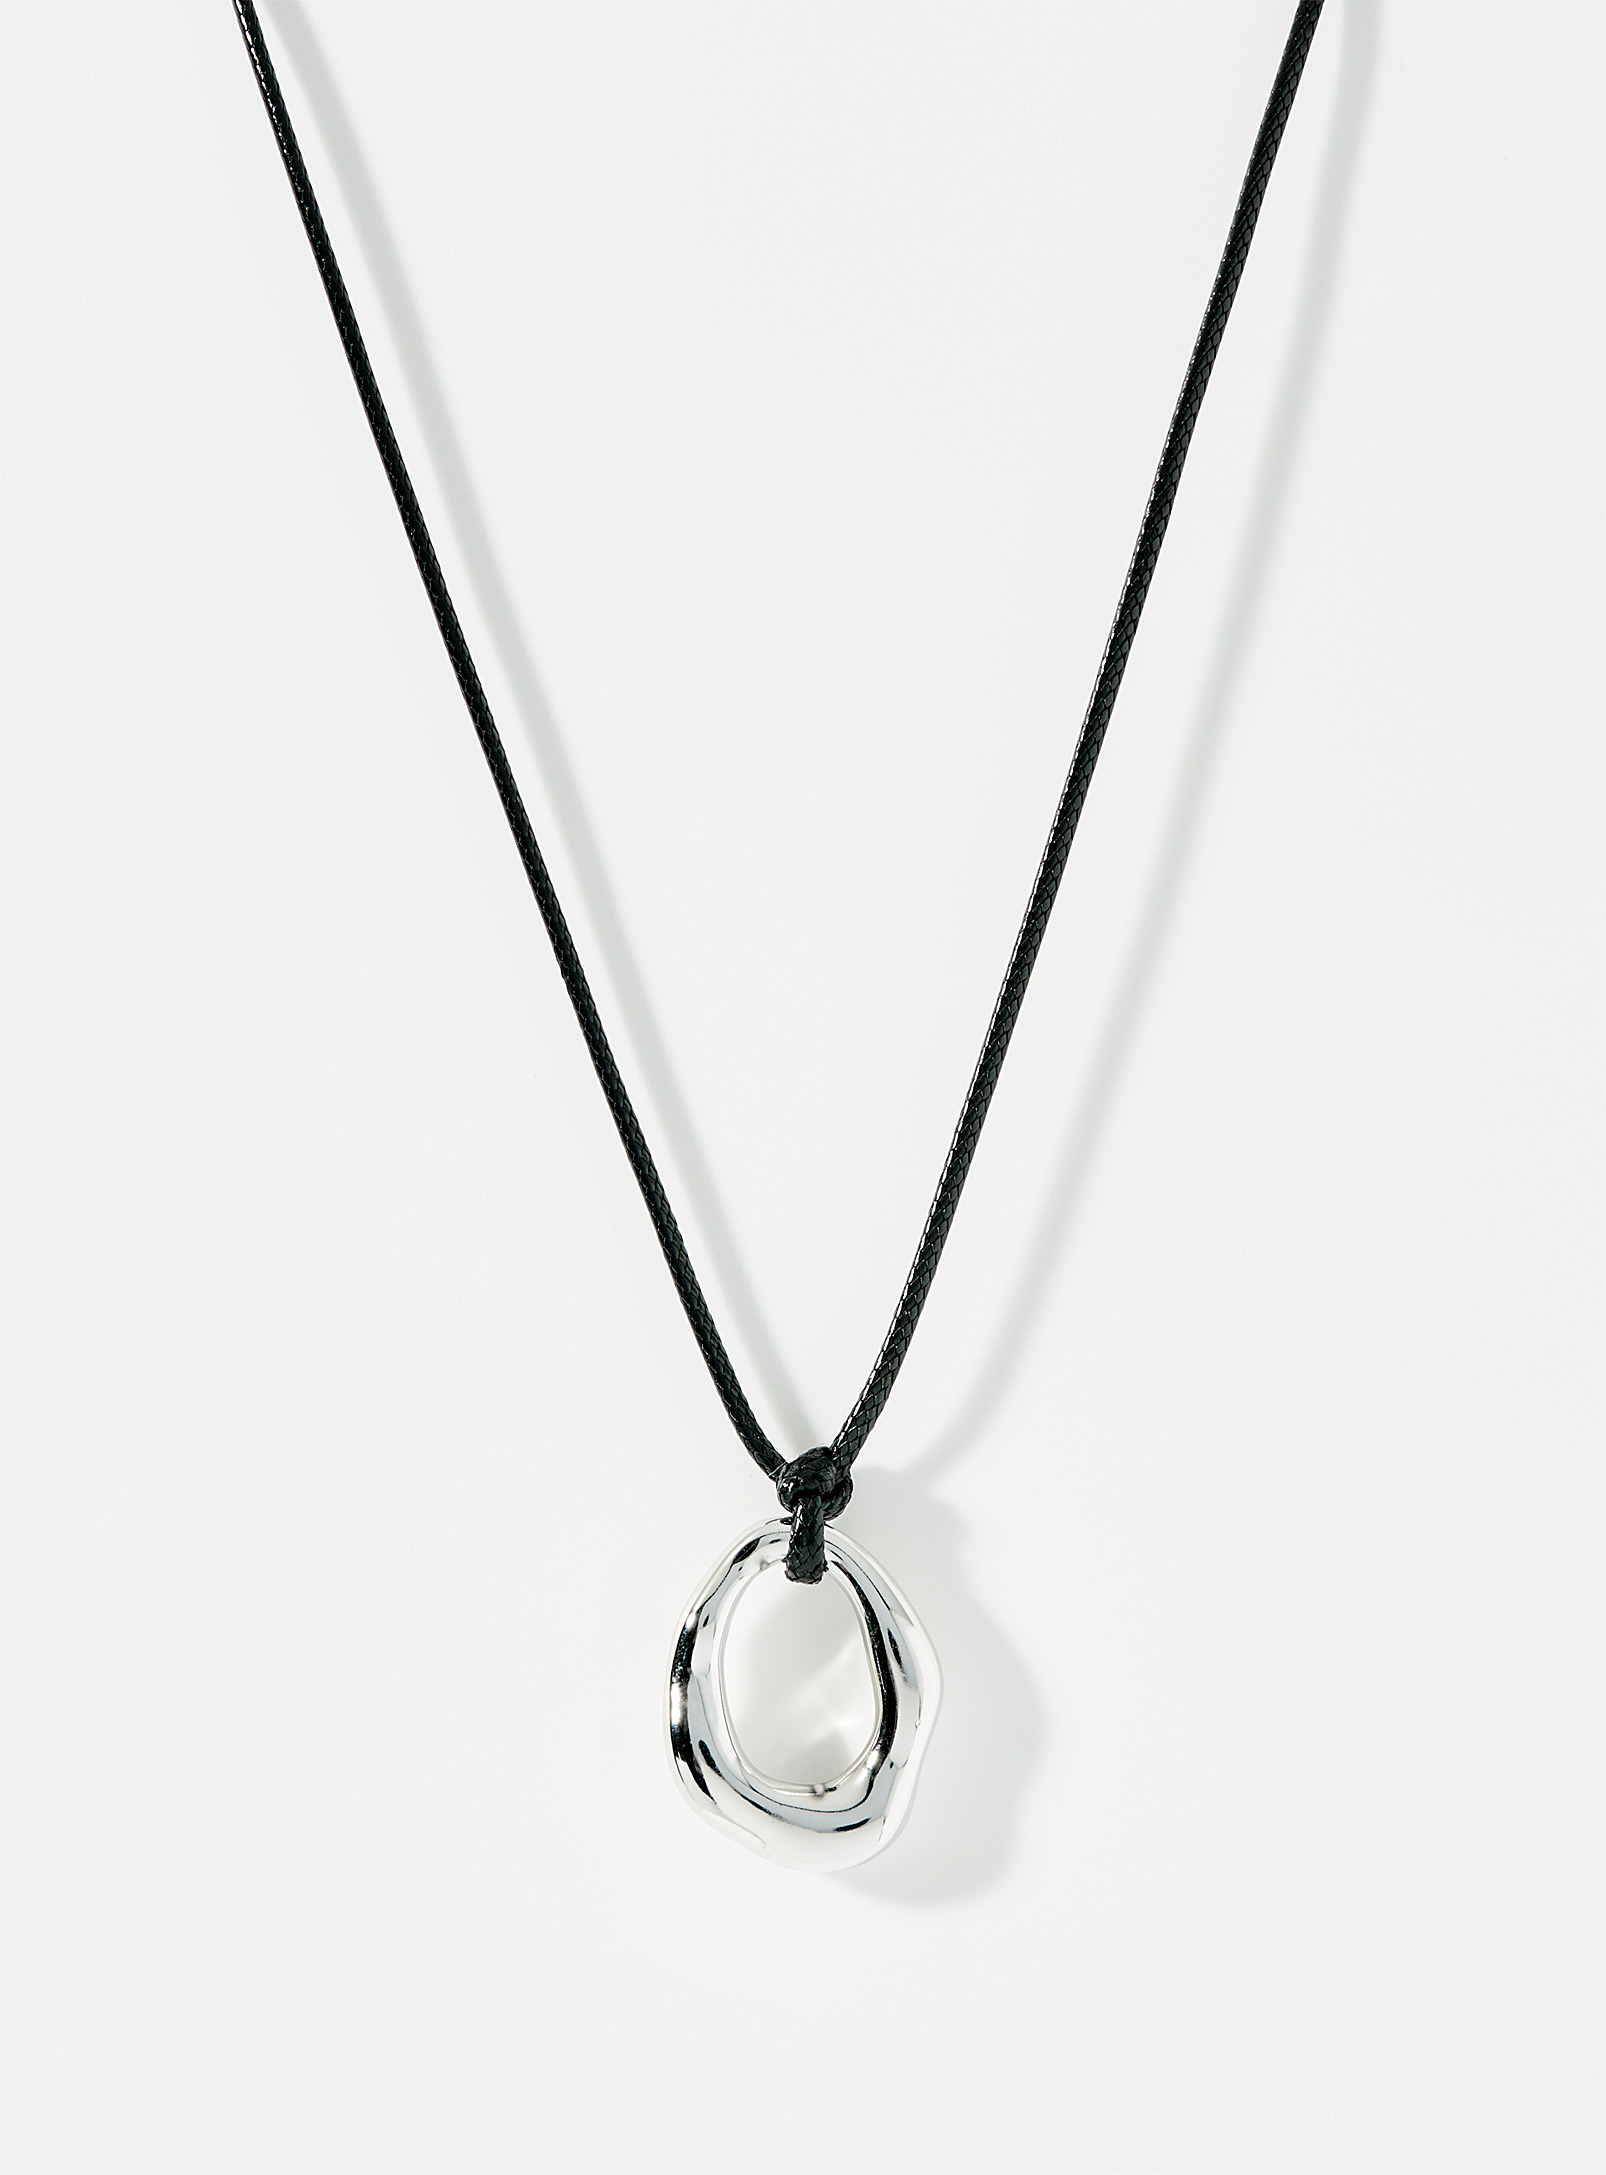 Simons - Women's Sinuous ring cord necklace